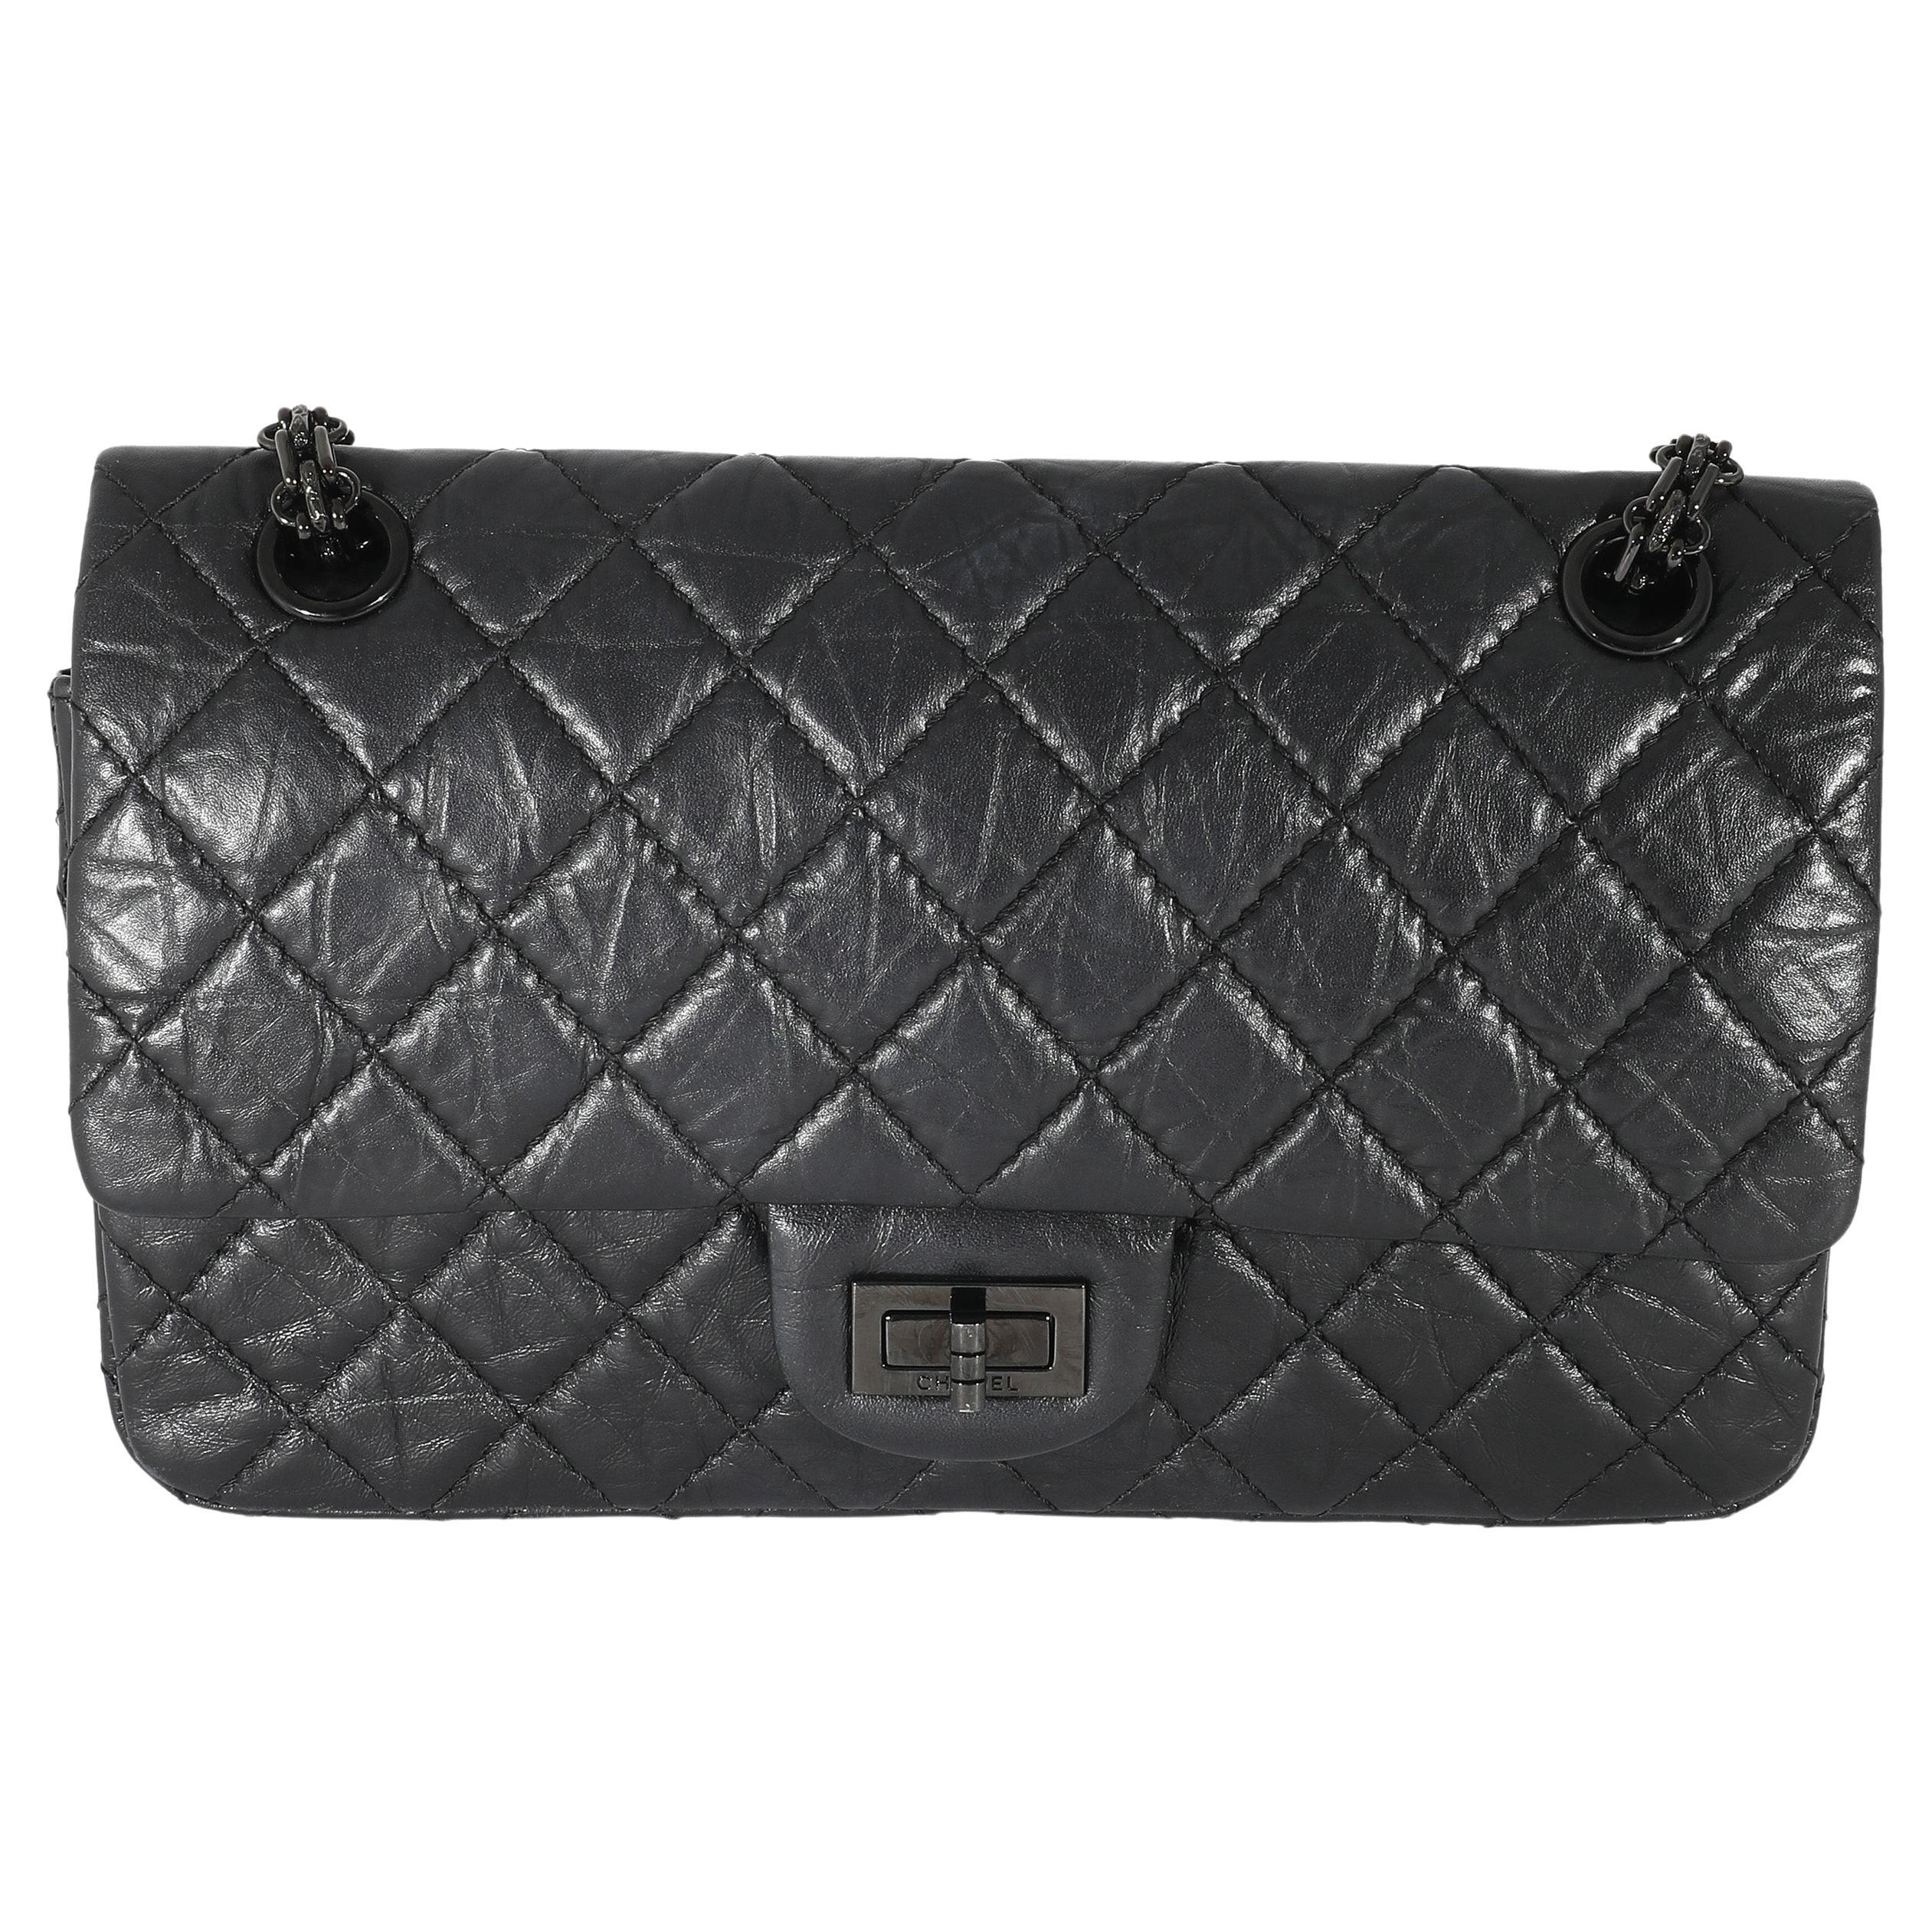 Chanel So Black Quilted Calfskin 2.55 Reissue 225 Double Flap Bag